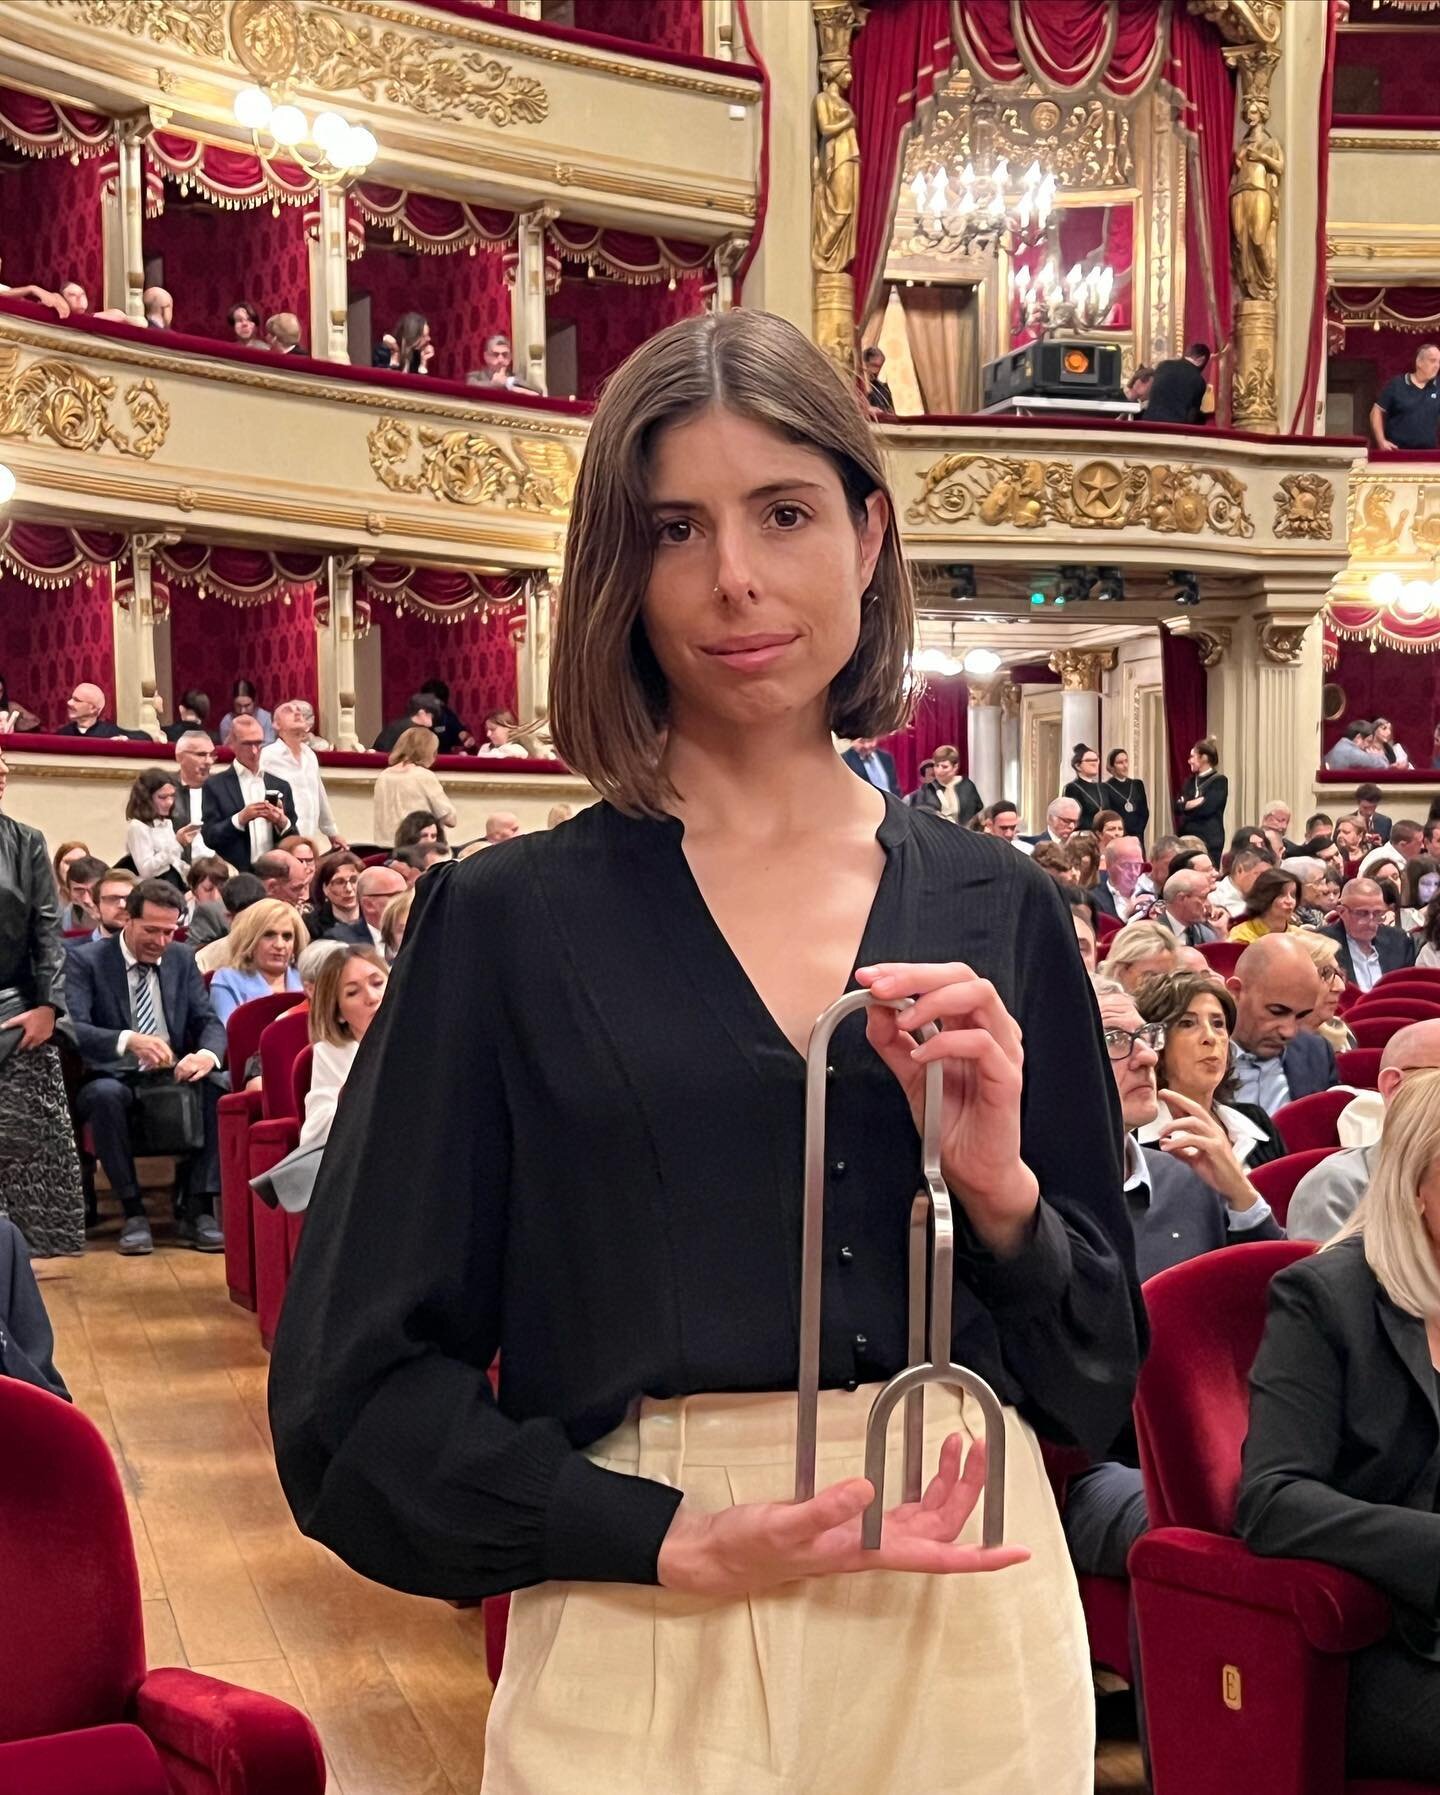 A few days ago, I had the privilege of presenting my award design commissioned by @triennalemilano on behalf of the Chamber of Commerce of Milan Monza Brianza Lodi to recognize entrepreneurship with a positive social impact. The ceremony was held at 